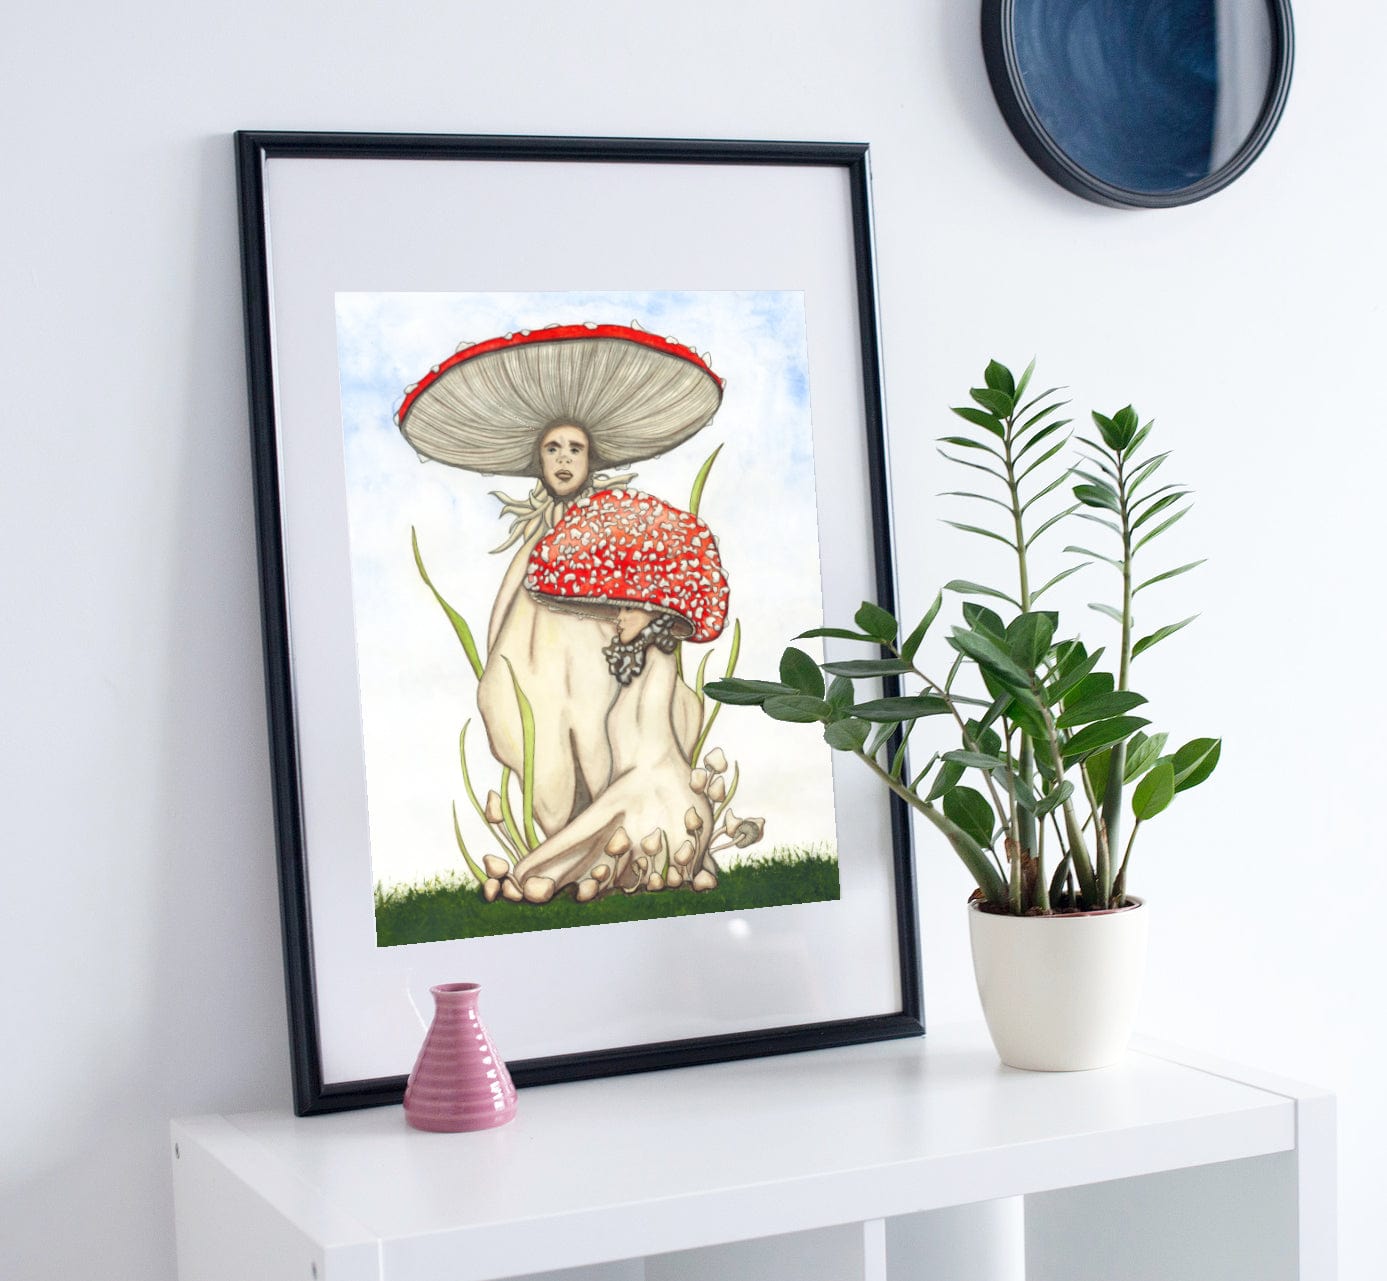 Snail and Mushroom 8x10 Whimsical Nature Photography Print of